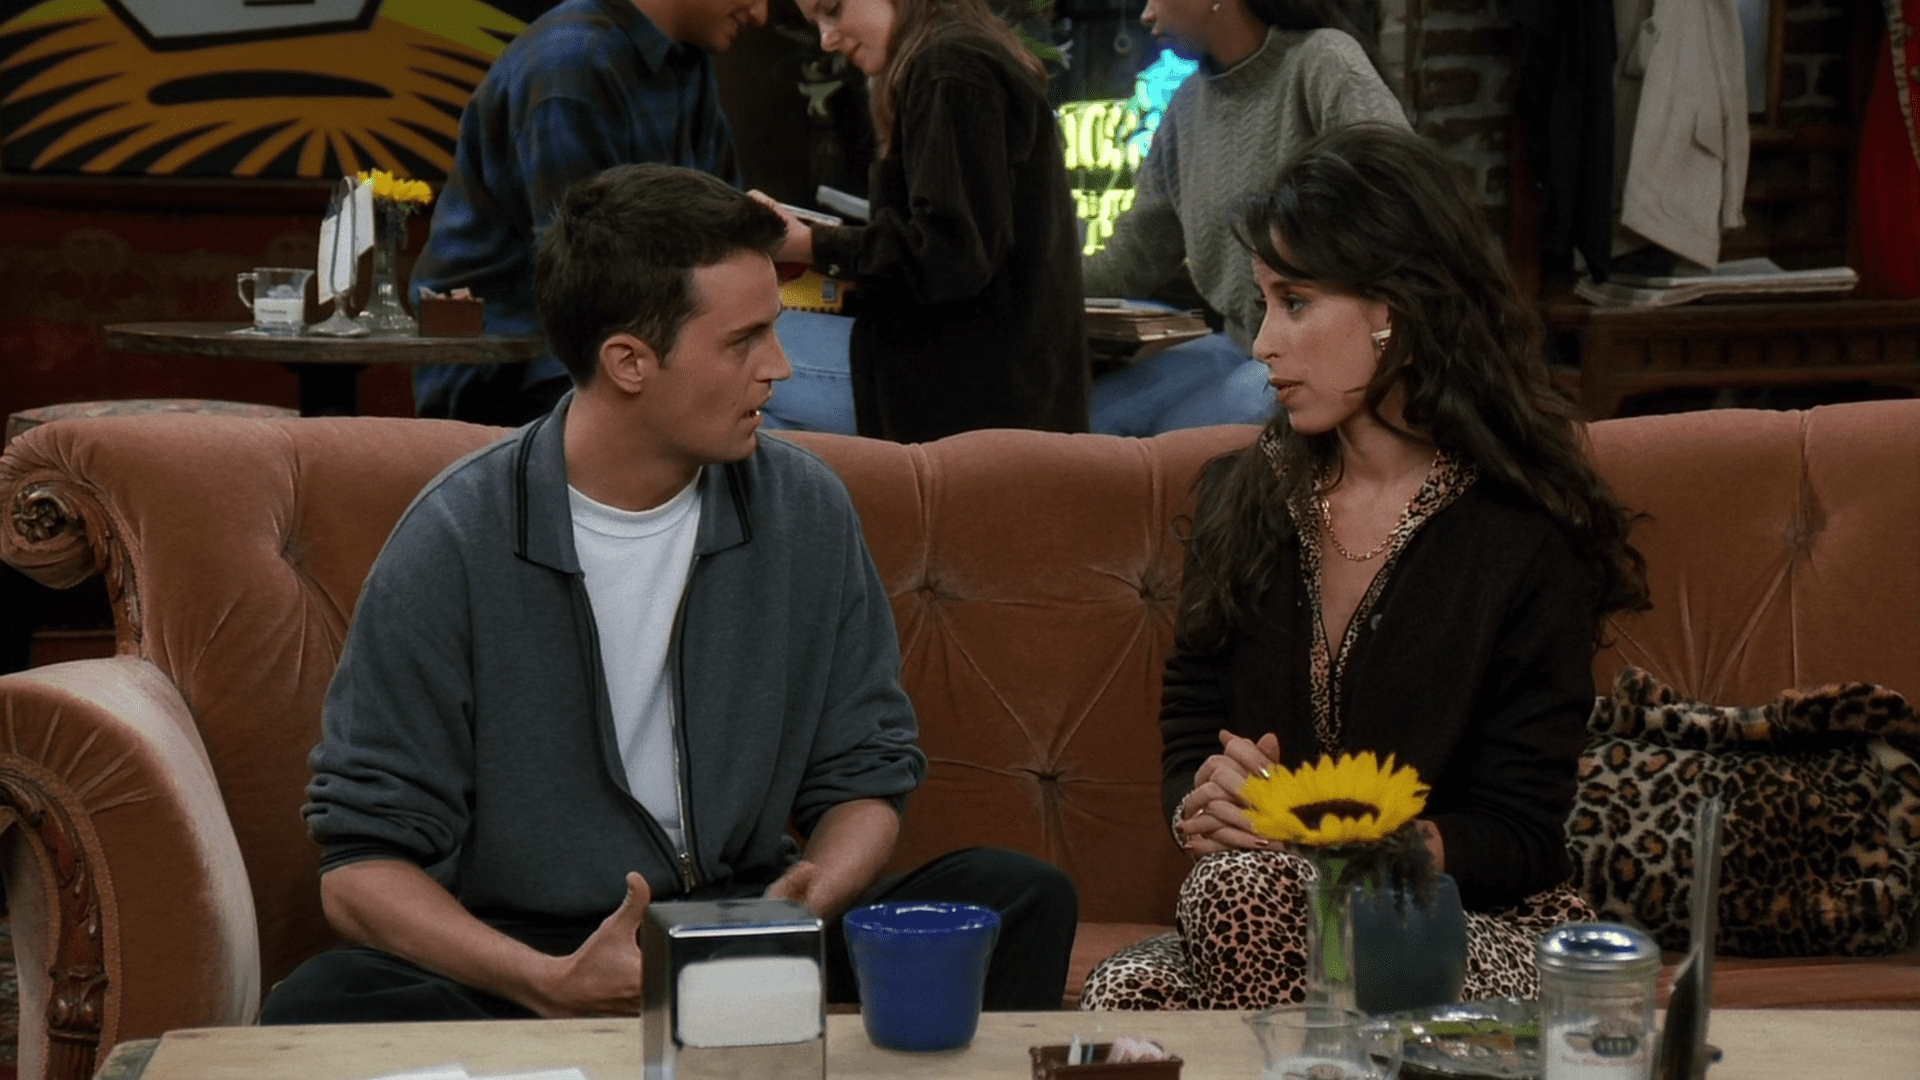 Second Look: Friends Season 3 Episode 8 – “The One with the Giant Poking Device”